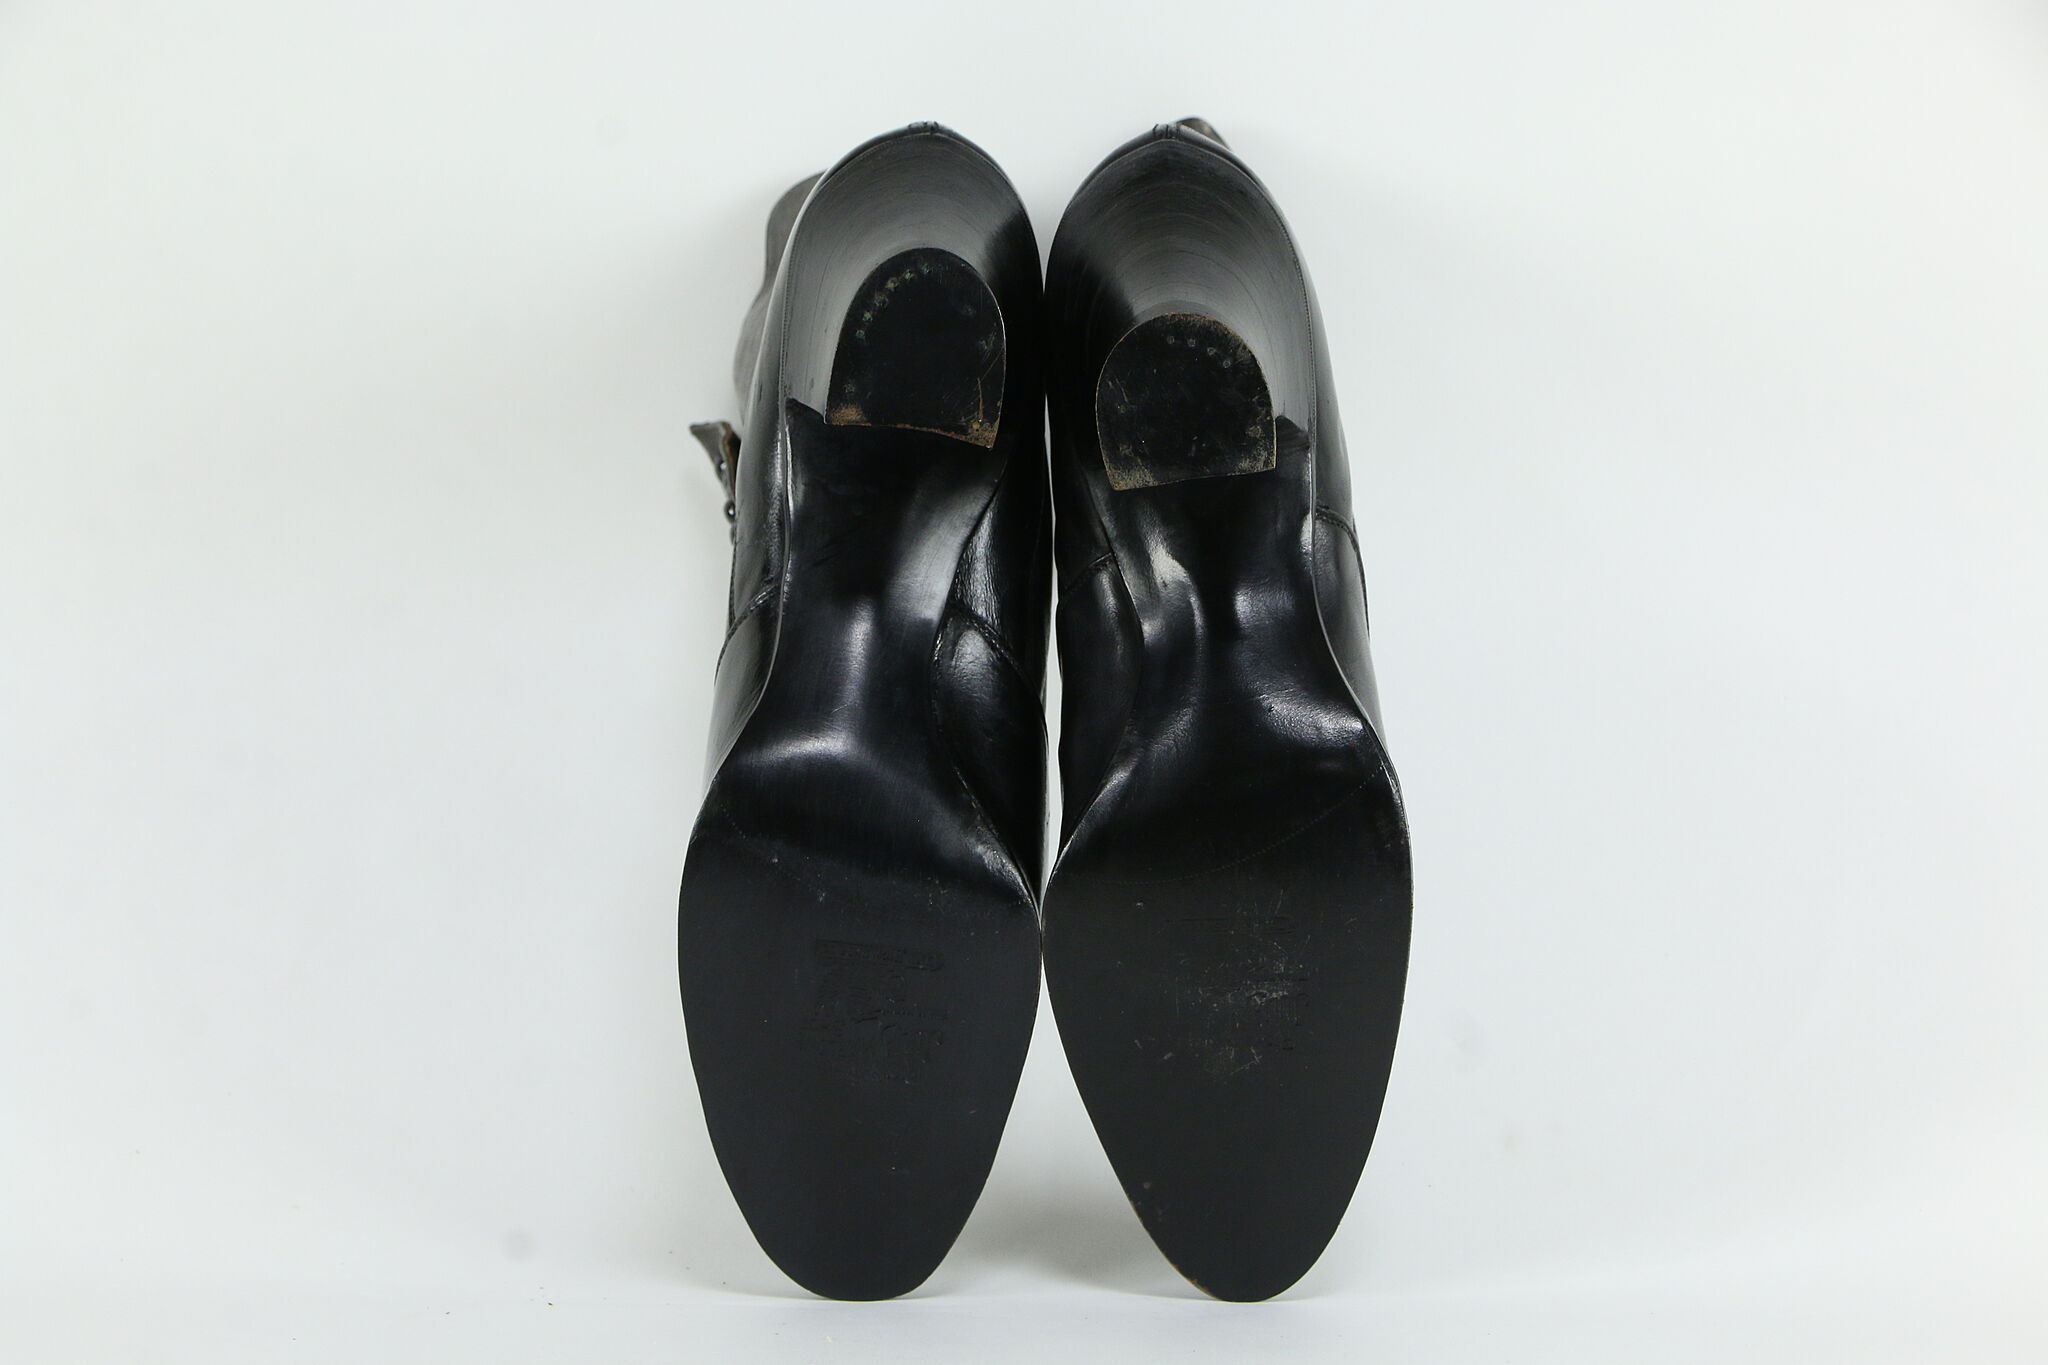 SOLD - Pair of Ladies Antique High Button Shoes, Never Worn #35481 ...